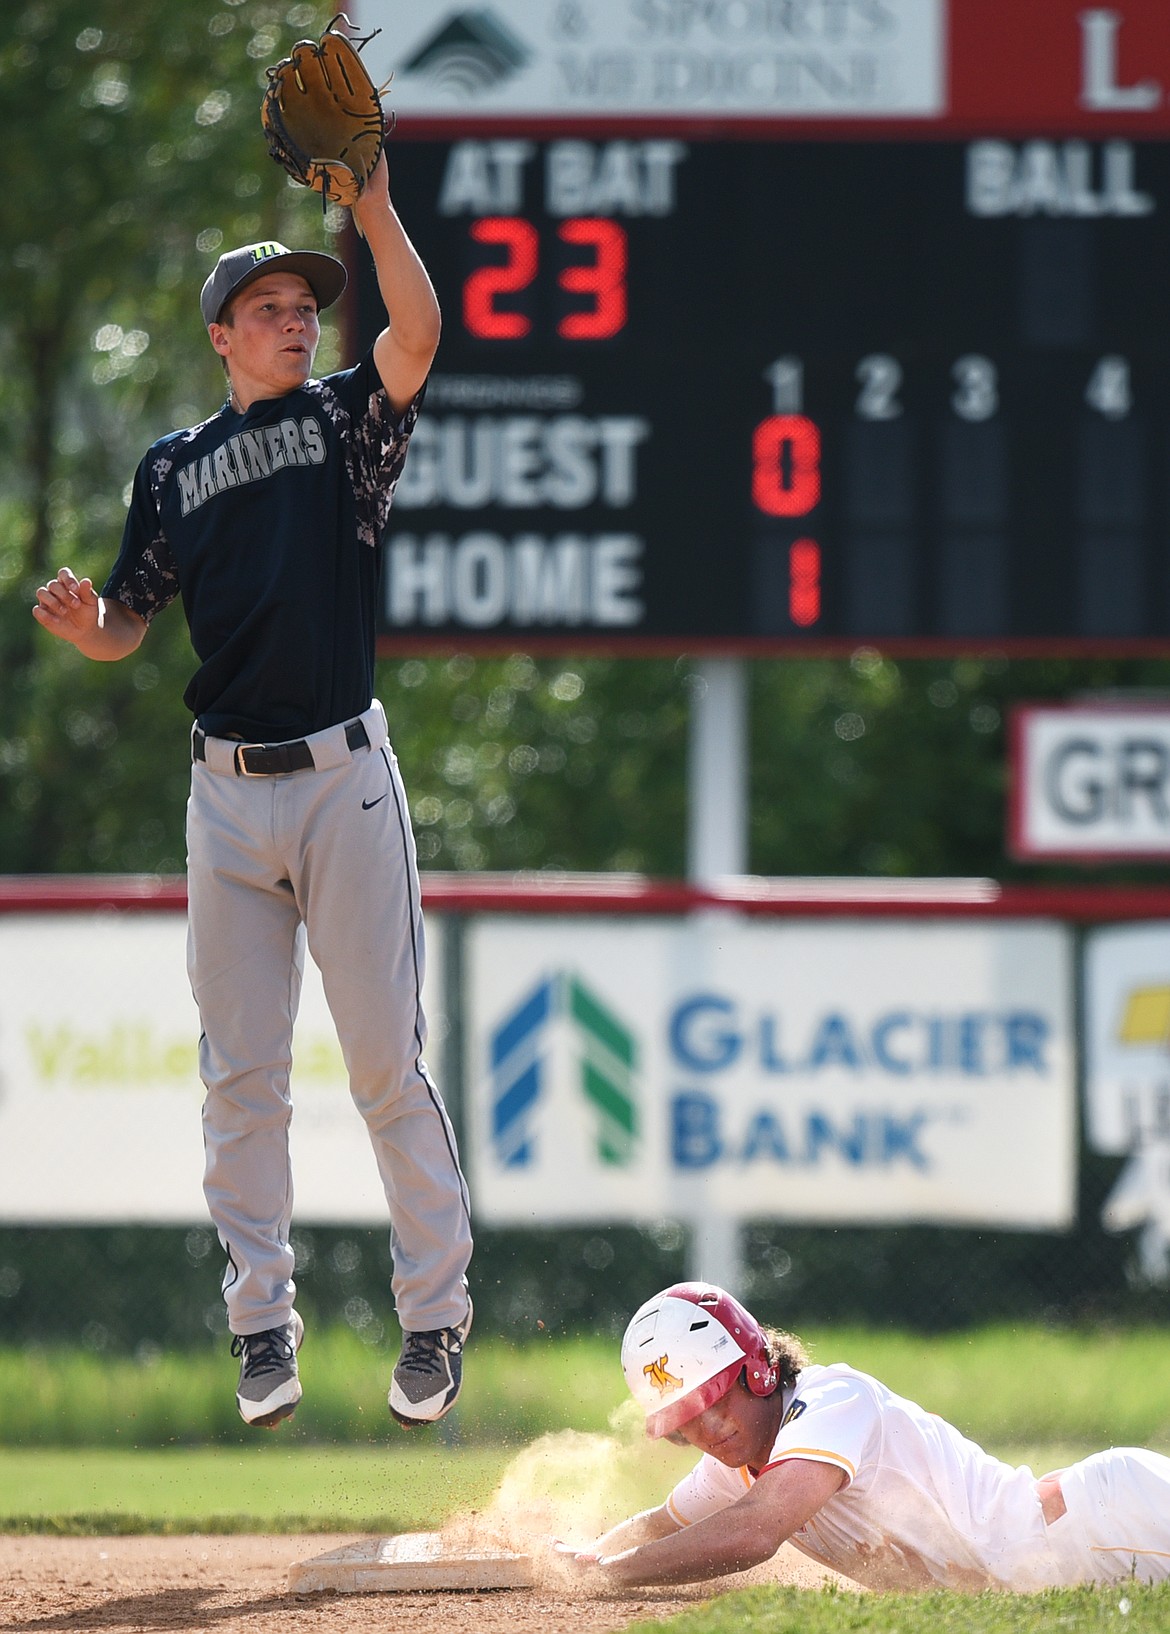 Kalispell's Ryan Symmes steals second base in the bottom of the first against Mission Valley Mariners A at Griffin Field on Wednesday. Taking the throw at second is Mariners' shortstop Xavier Fisher. (Casey Kreider/Daily Inter Lake)